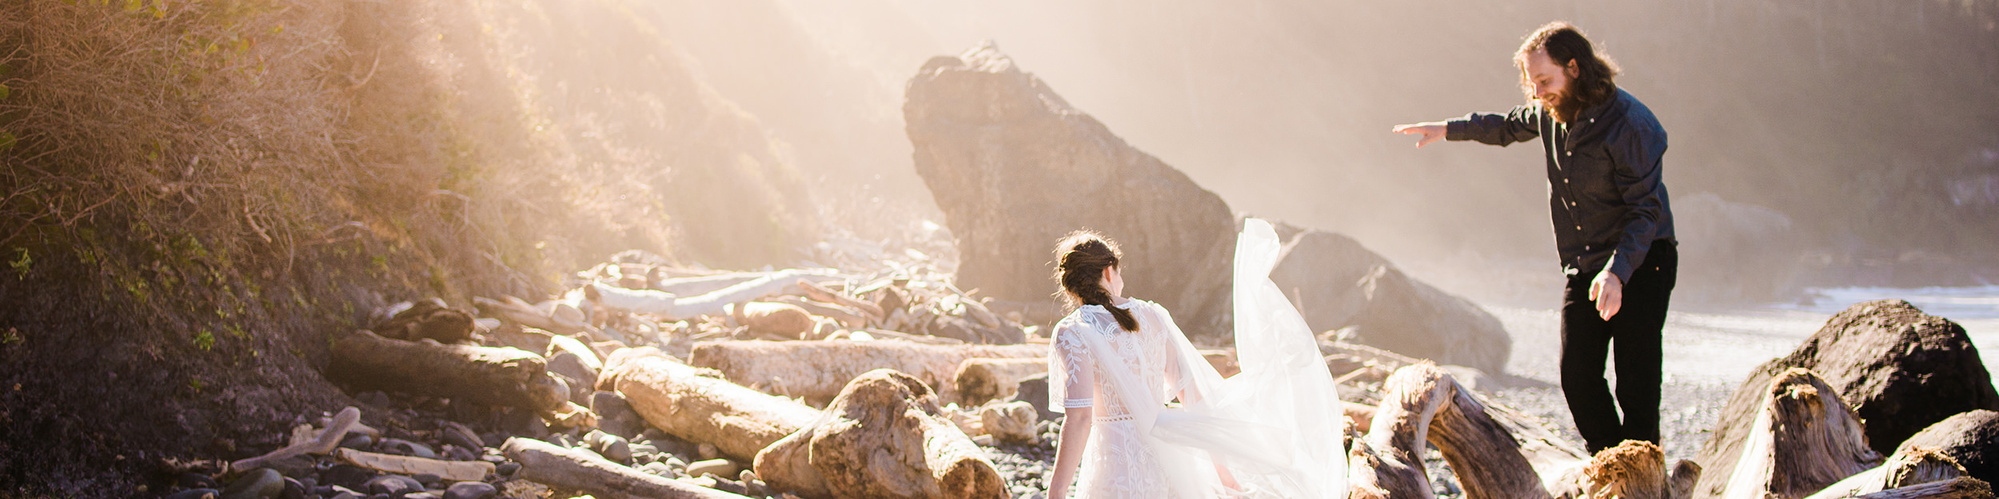 A bride and groom frolic on a Northern California beach; the bride jumps down from a pile of driftwood, her veil flowing behind her